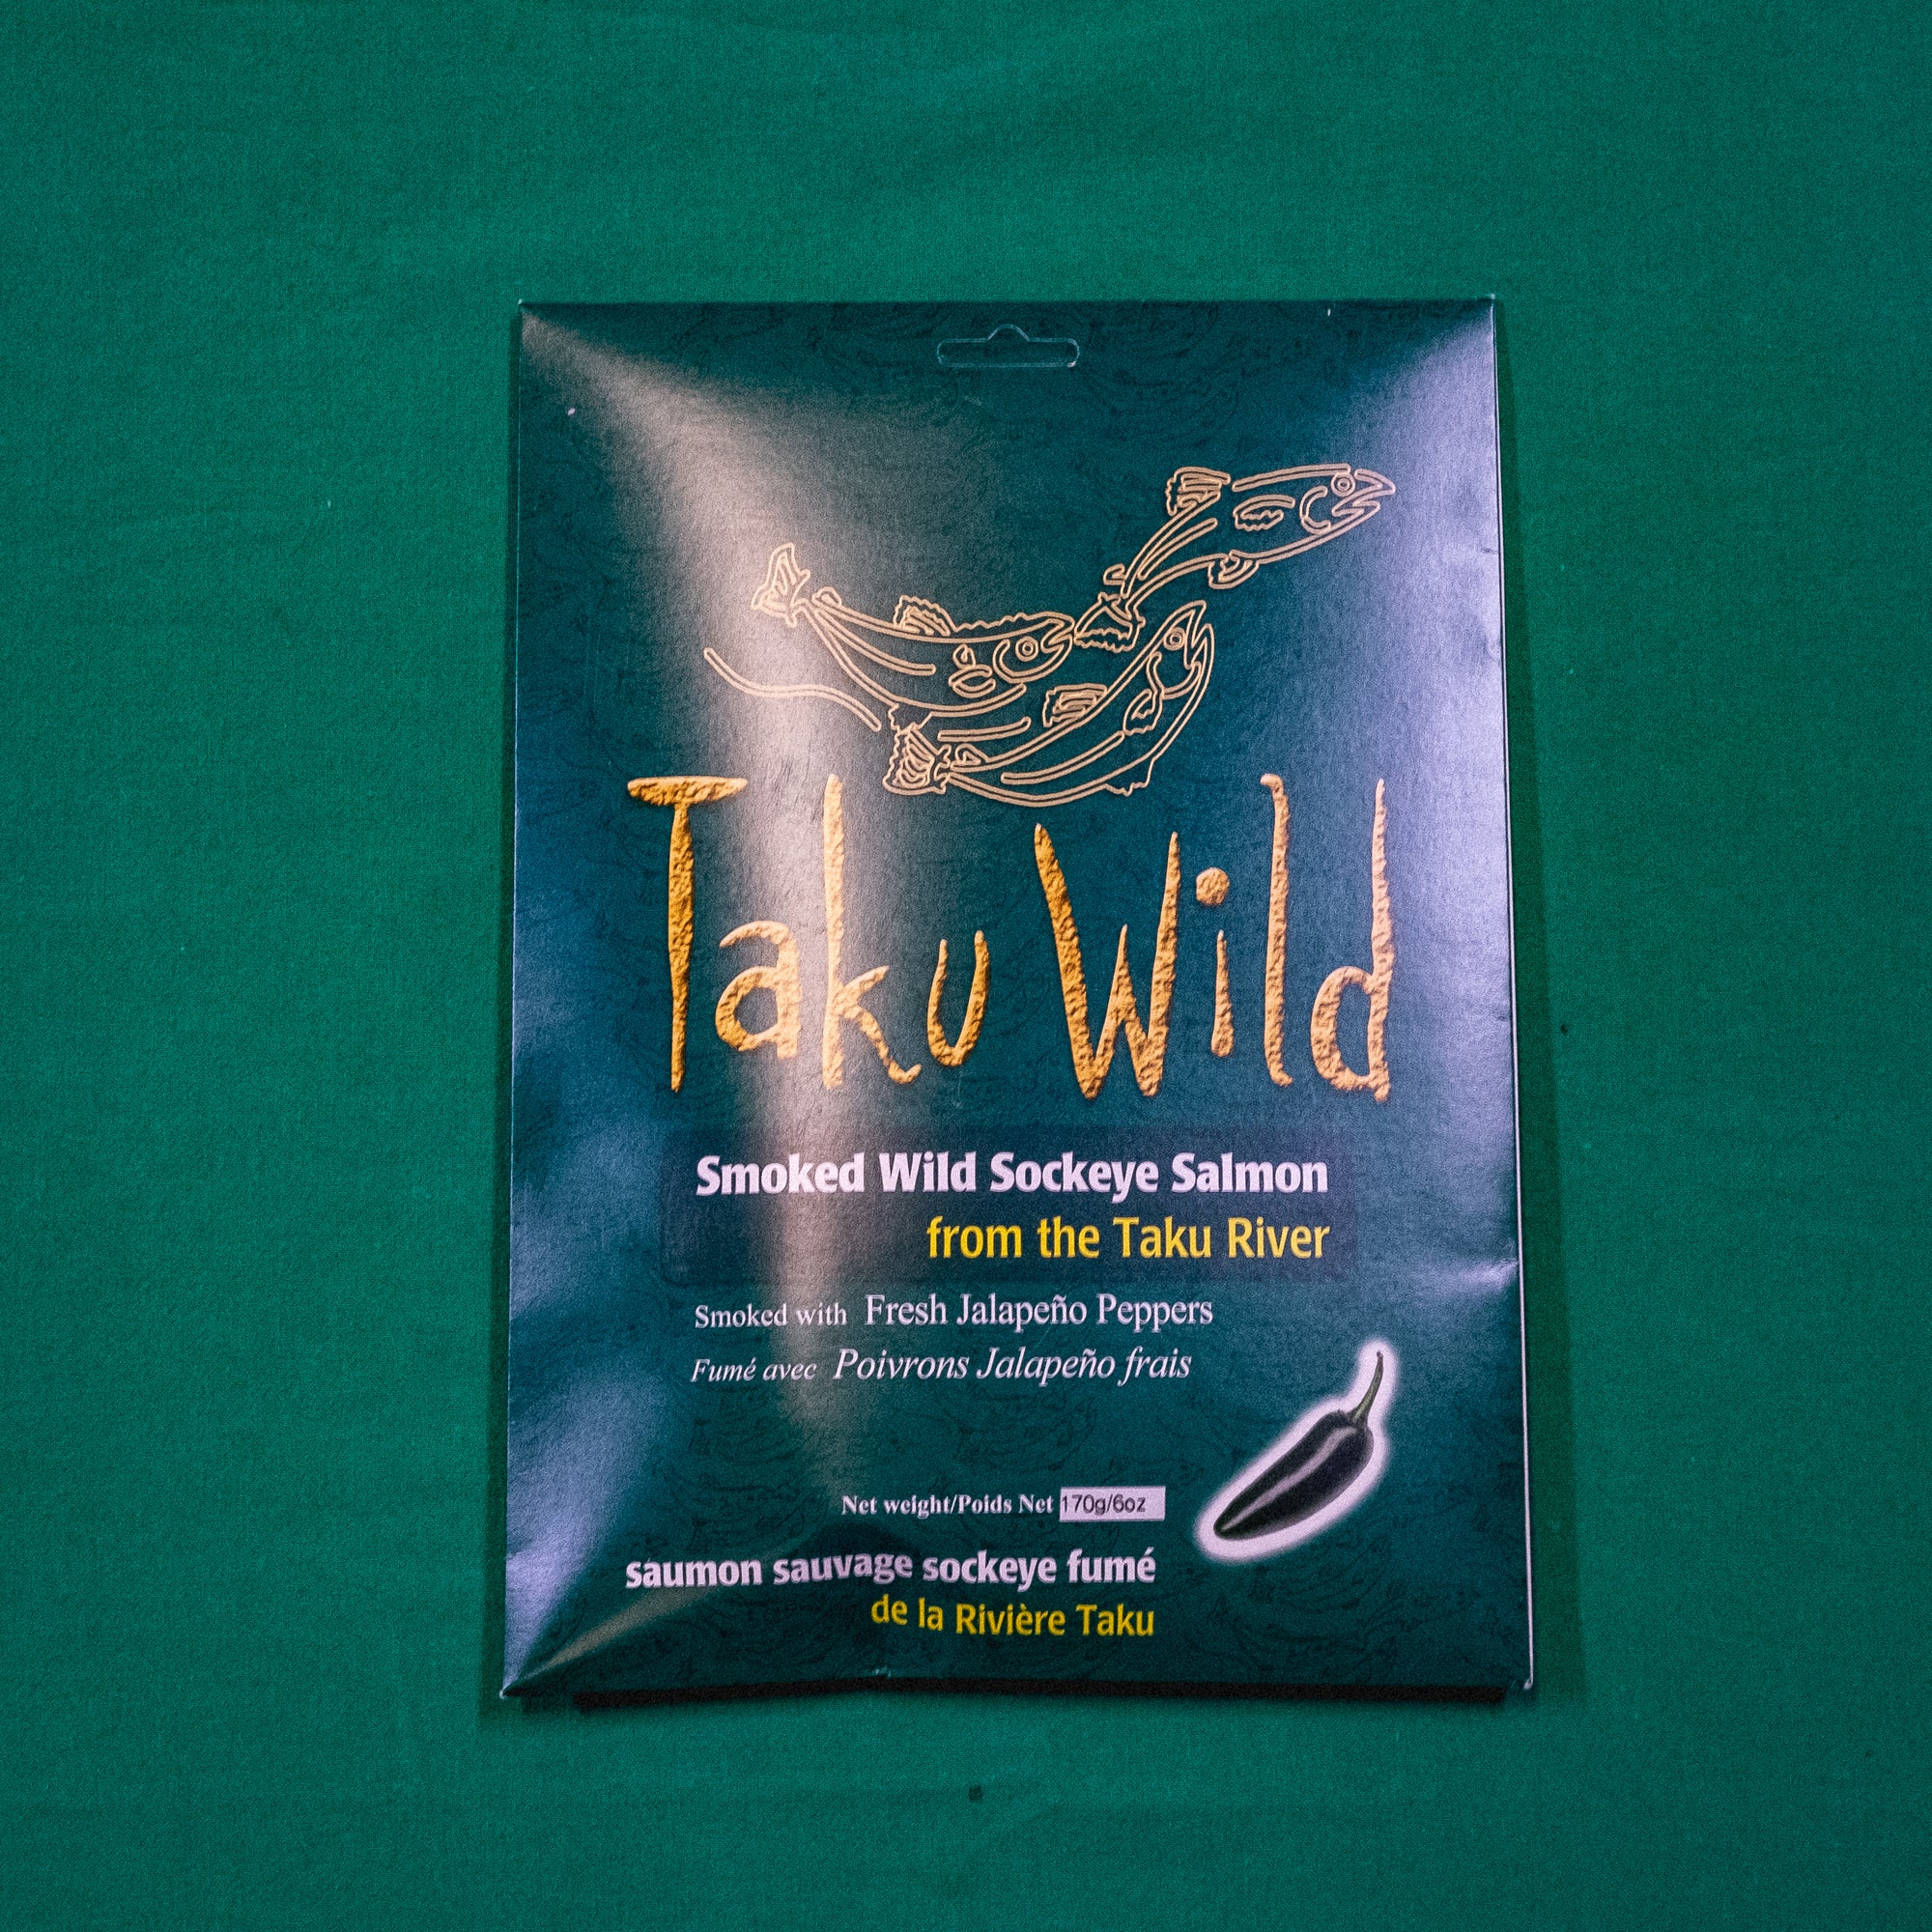 A packet with illustrations of salmon. Text on the image says "Taku Wild. Smoked Wild Sockeye Salmon from the Taku River. Smoked with Fresh Jalapeno Pepper." End of image description.